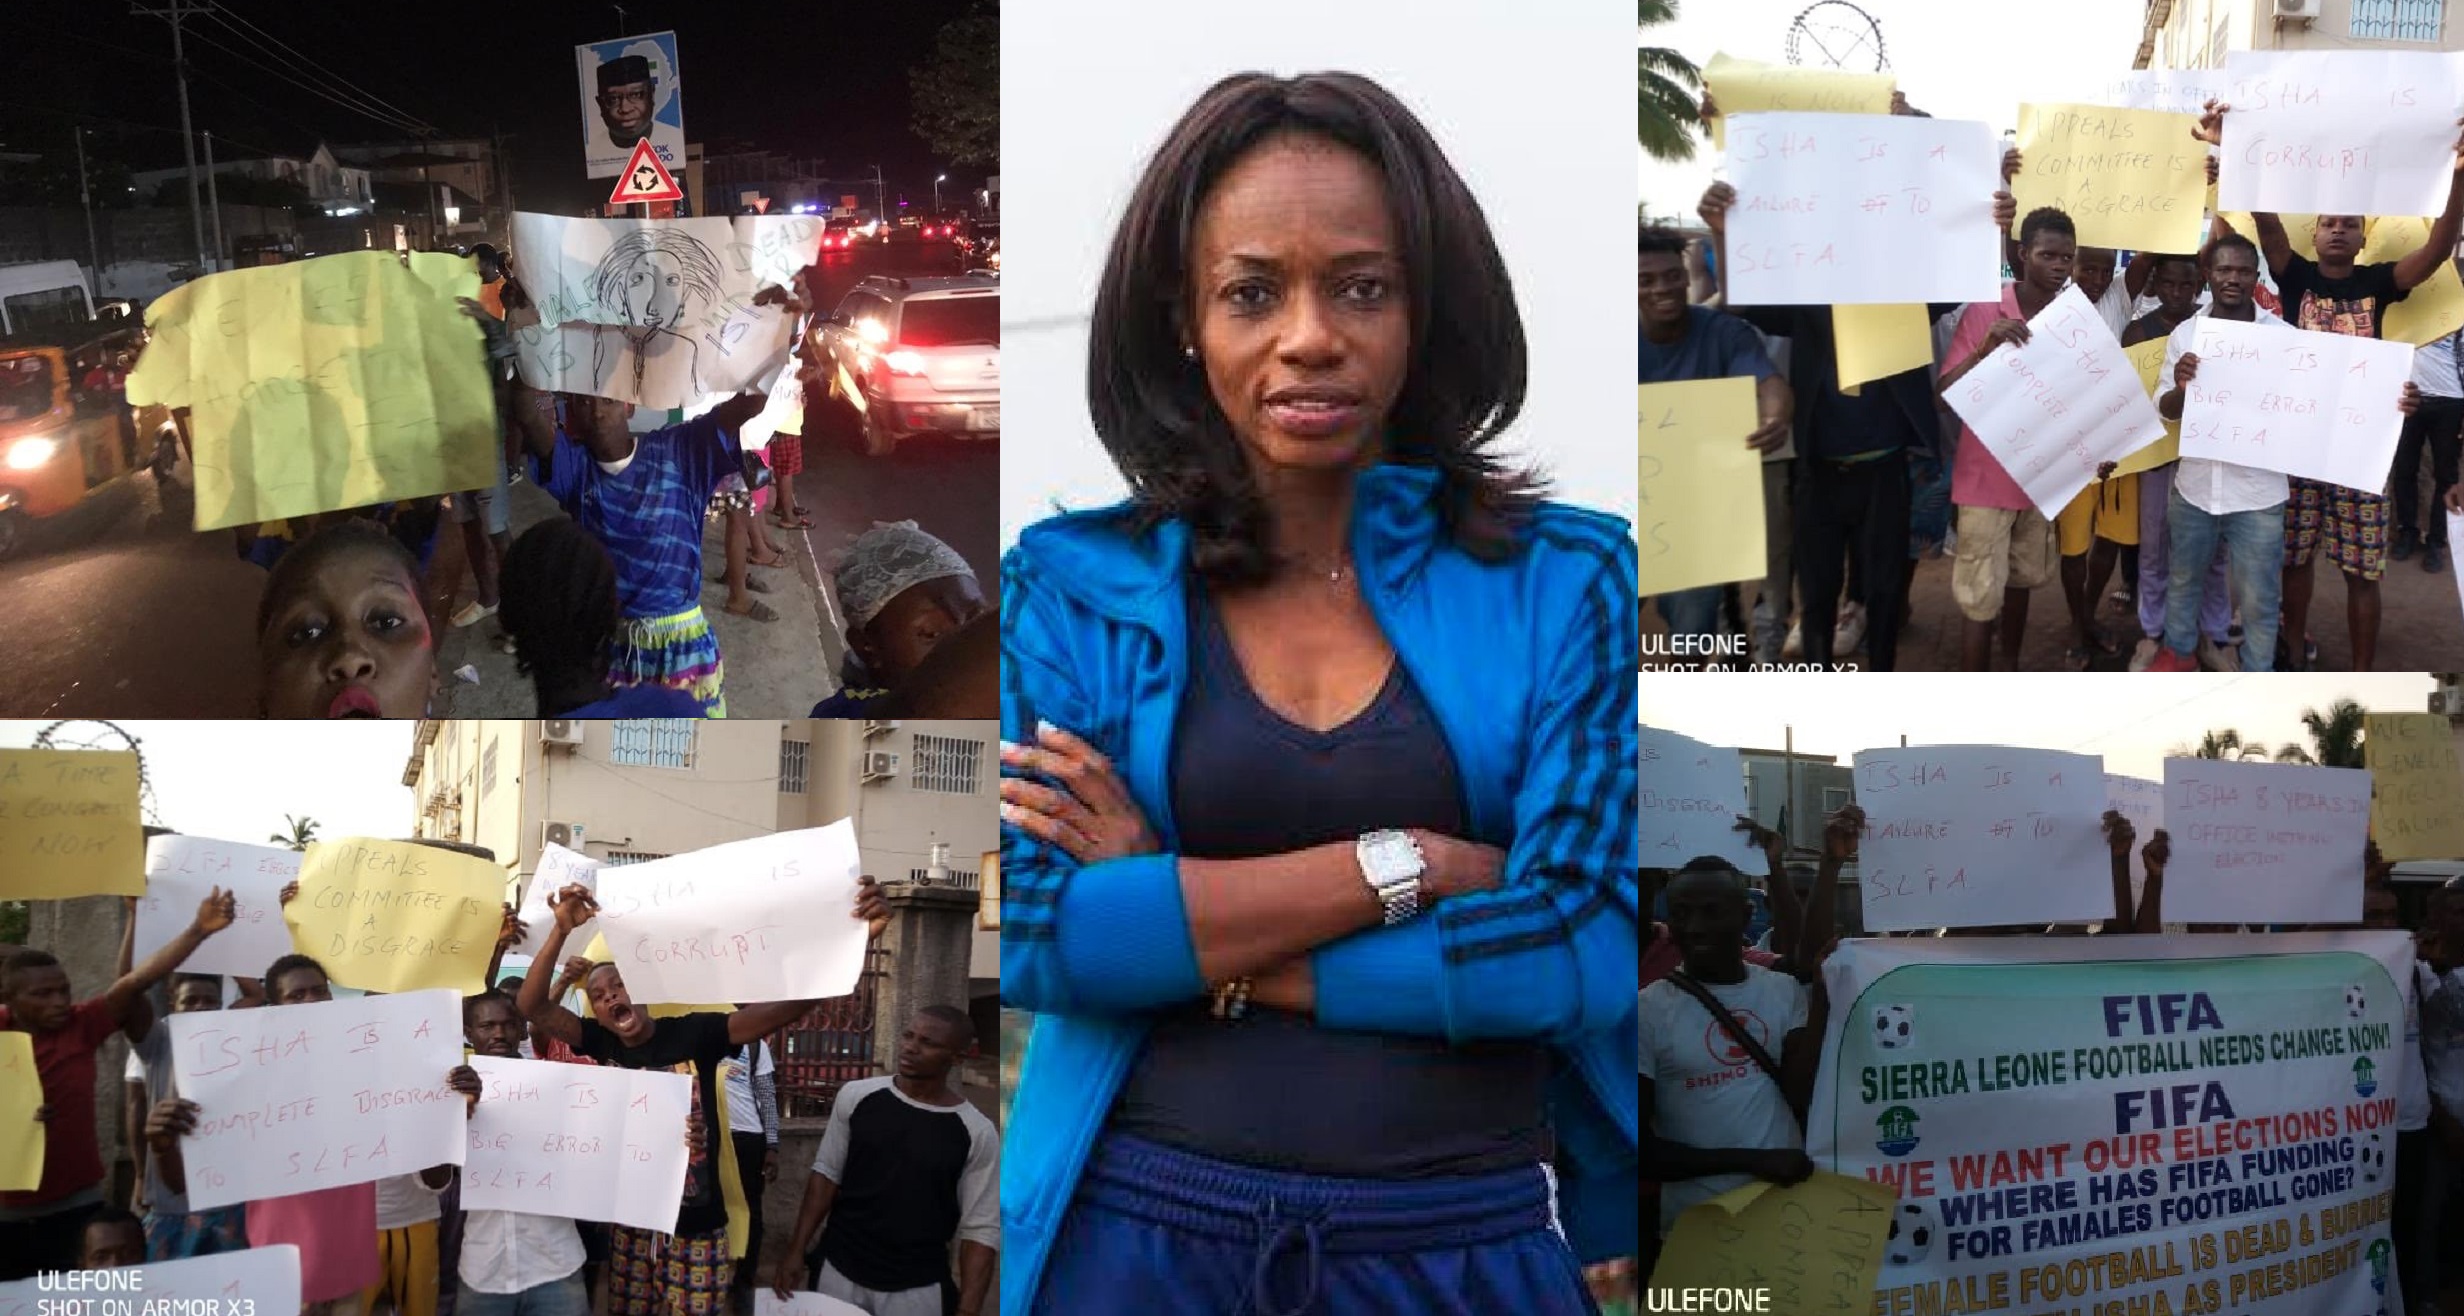 JUST IN: Tension in Freetown as Sierra Leoneans Protest Against Isha Johansen